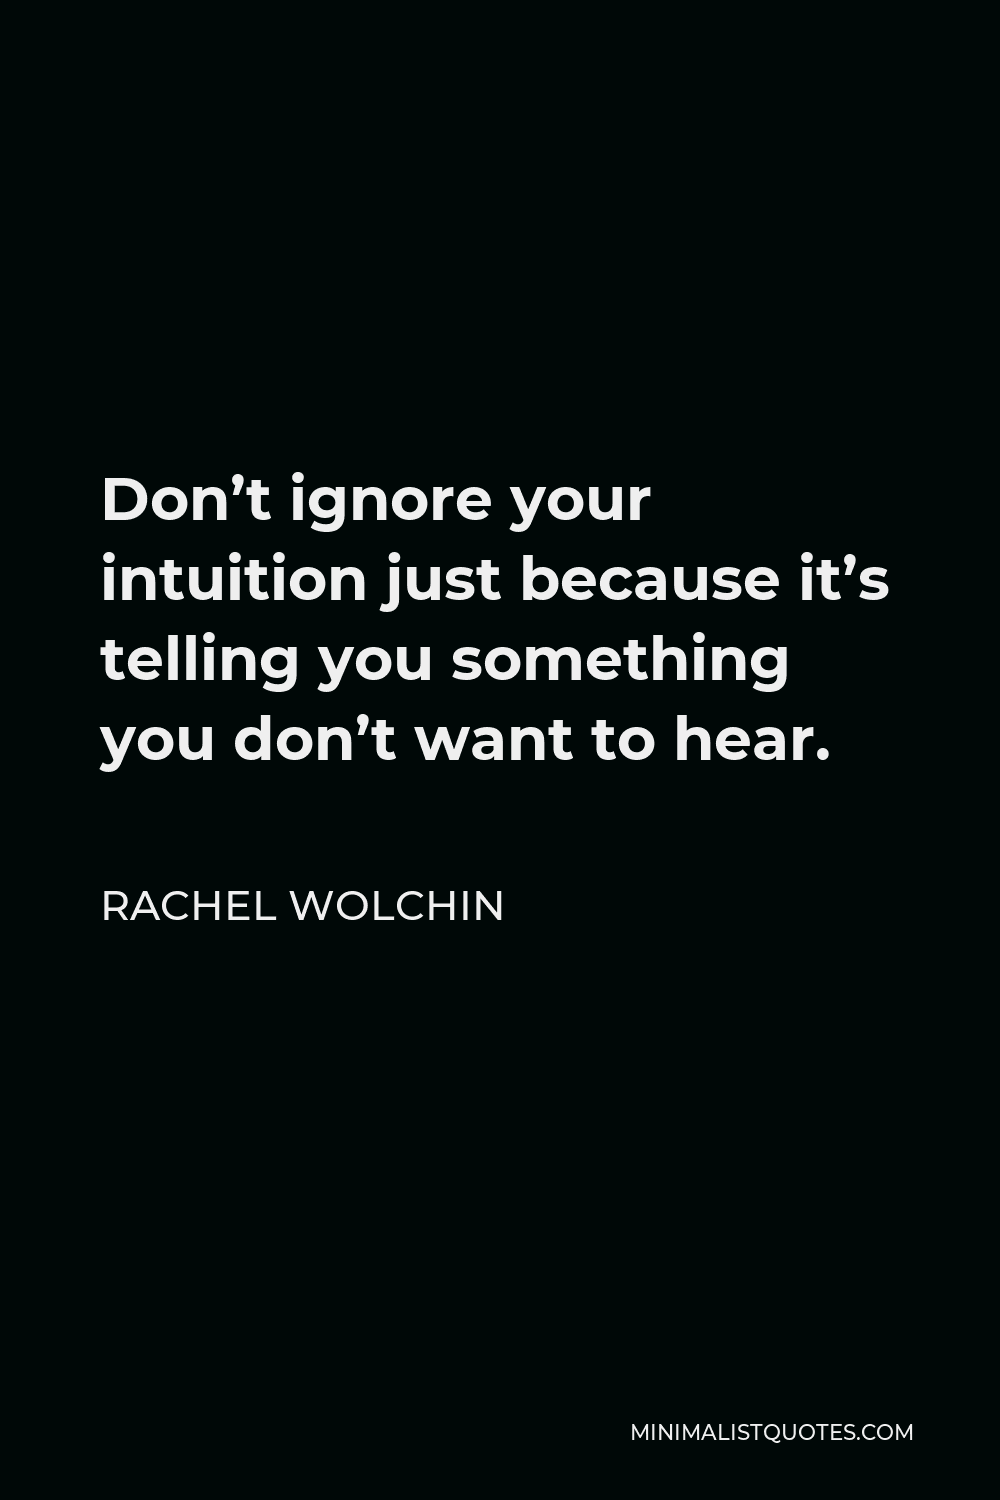 Rachel Wolchin Quote - Don’t ignore your intuition just because it’s telling you something you don’t want to hear.